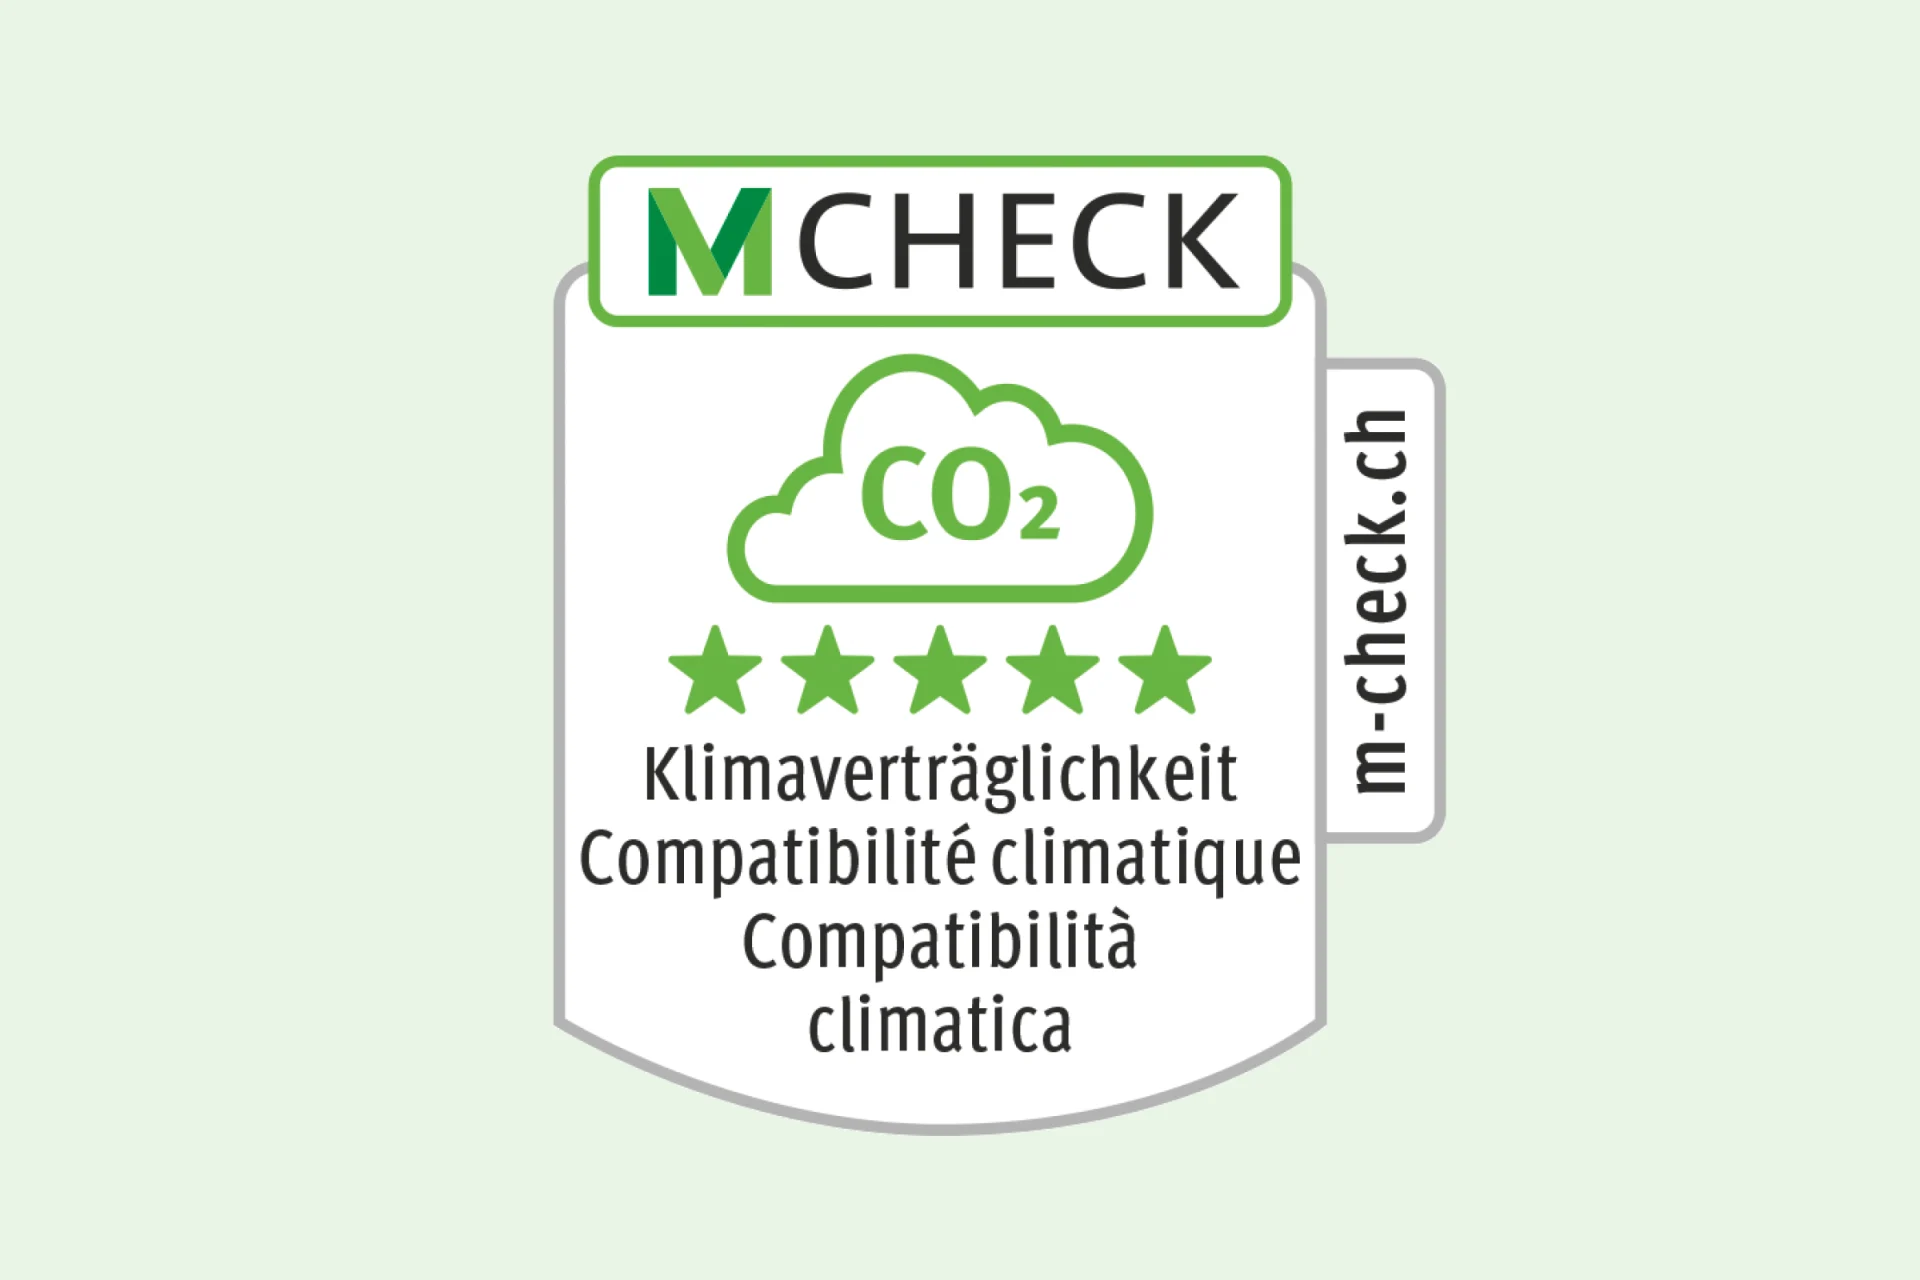 M-Check label for climate compatibility with 5 green stars.